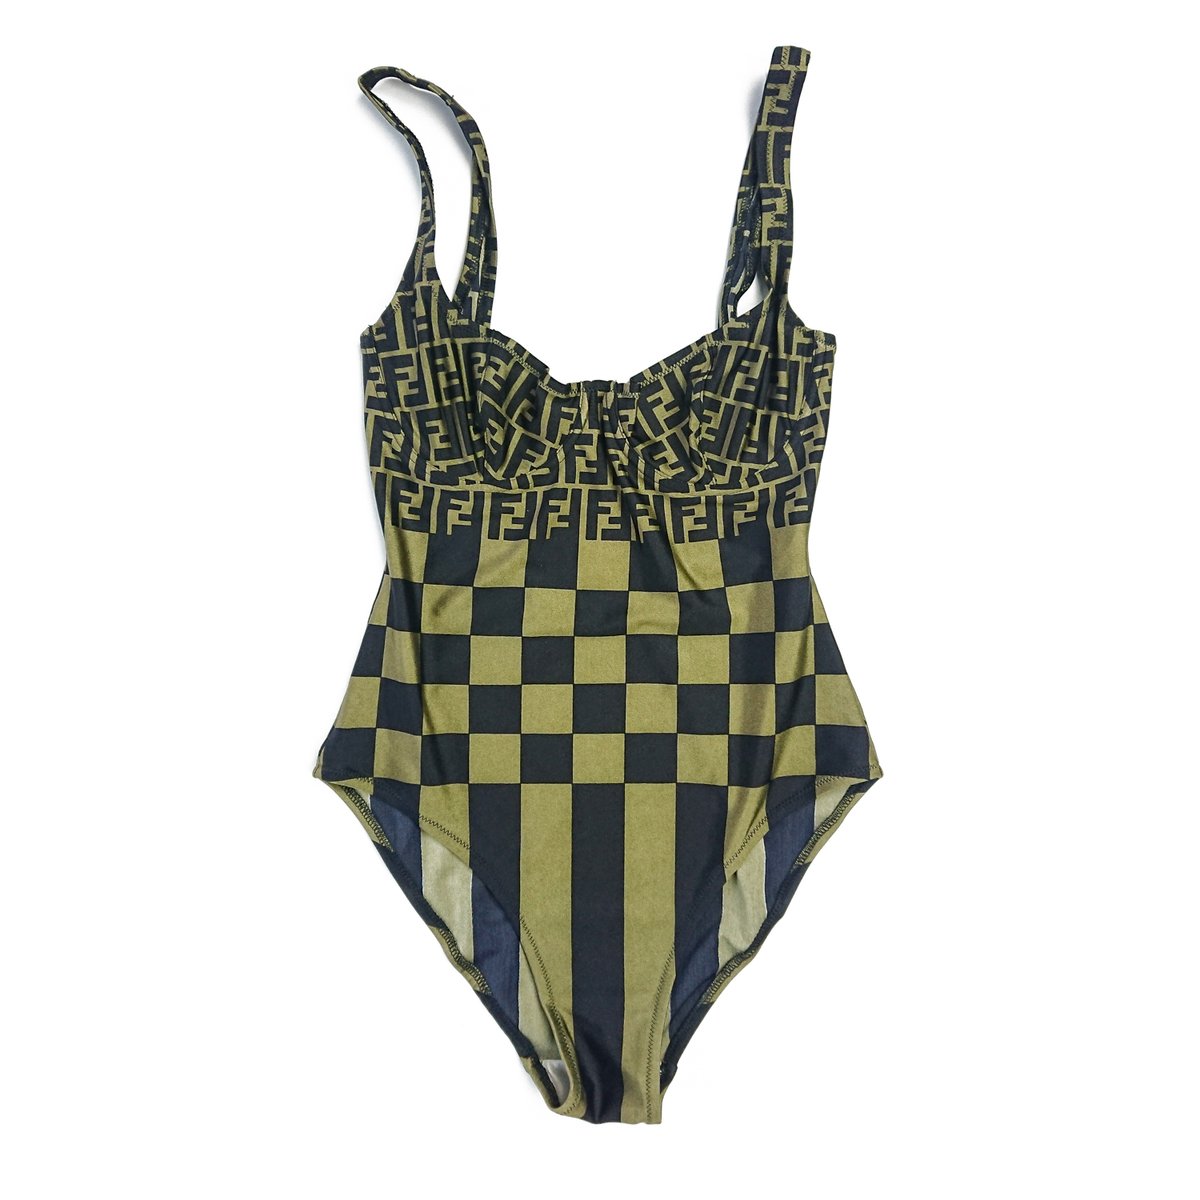 Fendi Mare Zucca Swimsuit † Ruder Than The Rest